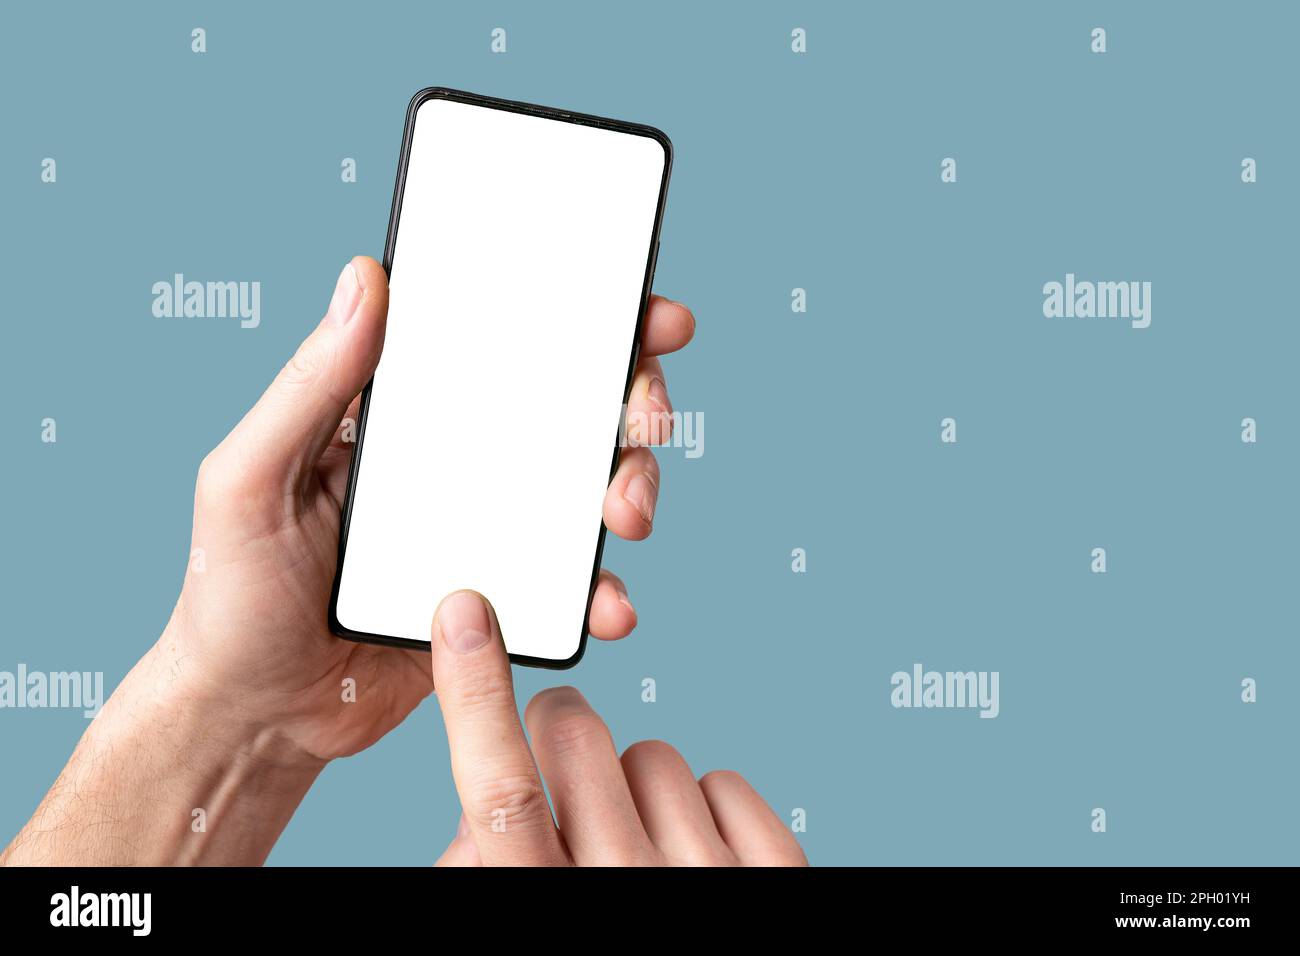 Mobile phone mock-up, finger touching, pointing on smartphone screen, display mockup in hand on blue background. Stock Photo